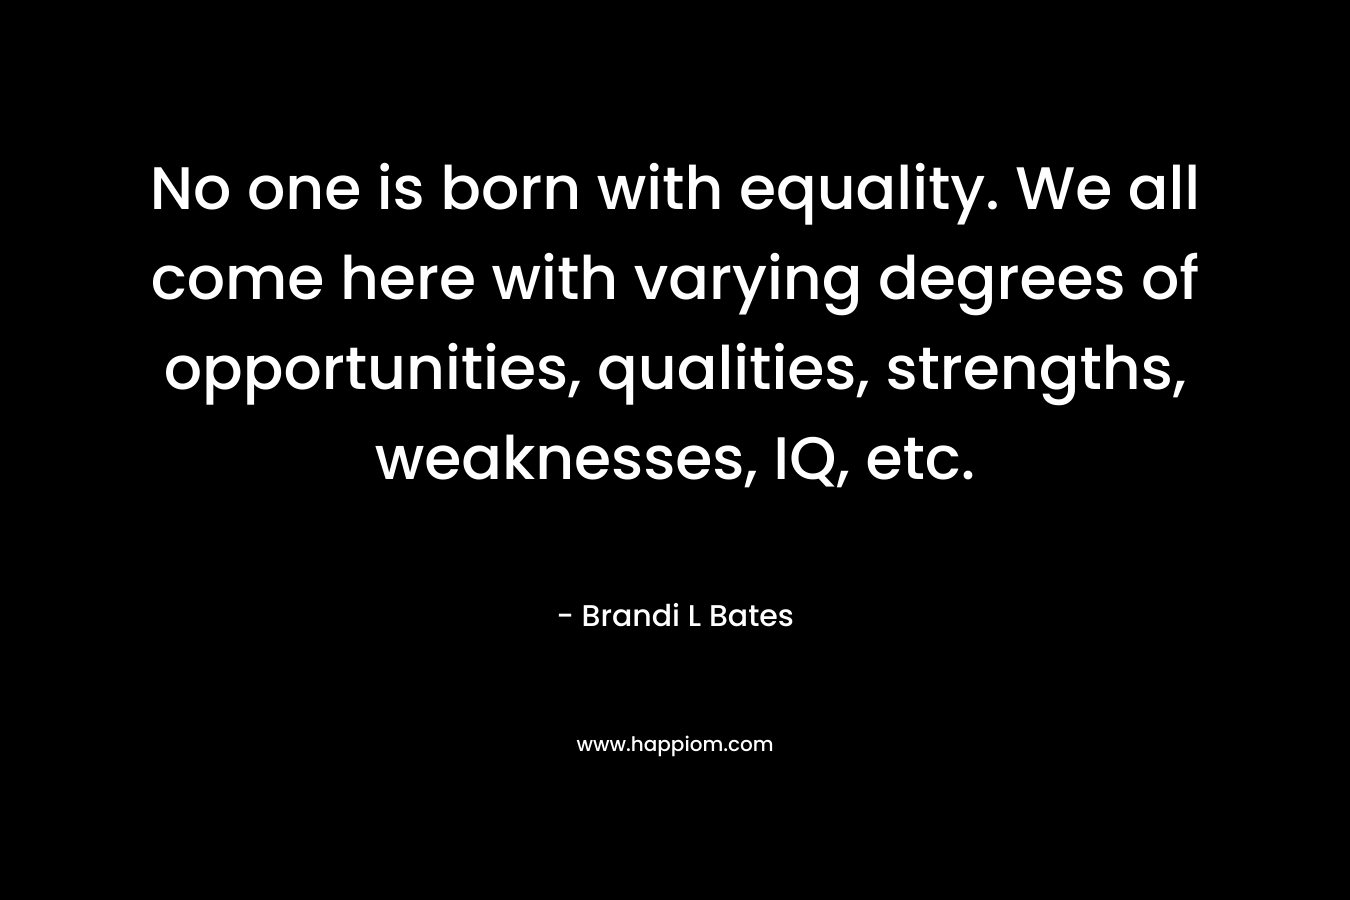 No one is born with equality. We all come here with varying degrees of opportunities, qualities, strengths, weaknesses, IQ, etc. – Brandi L Bates